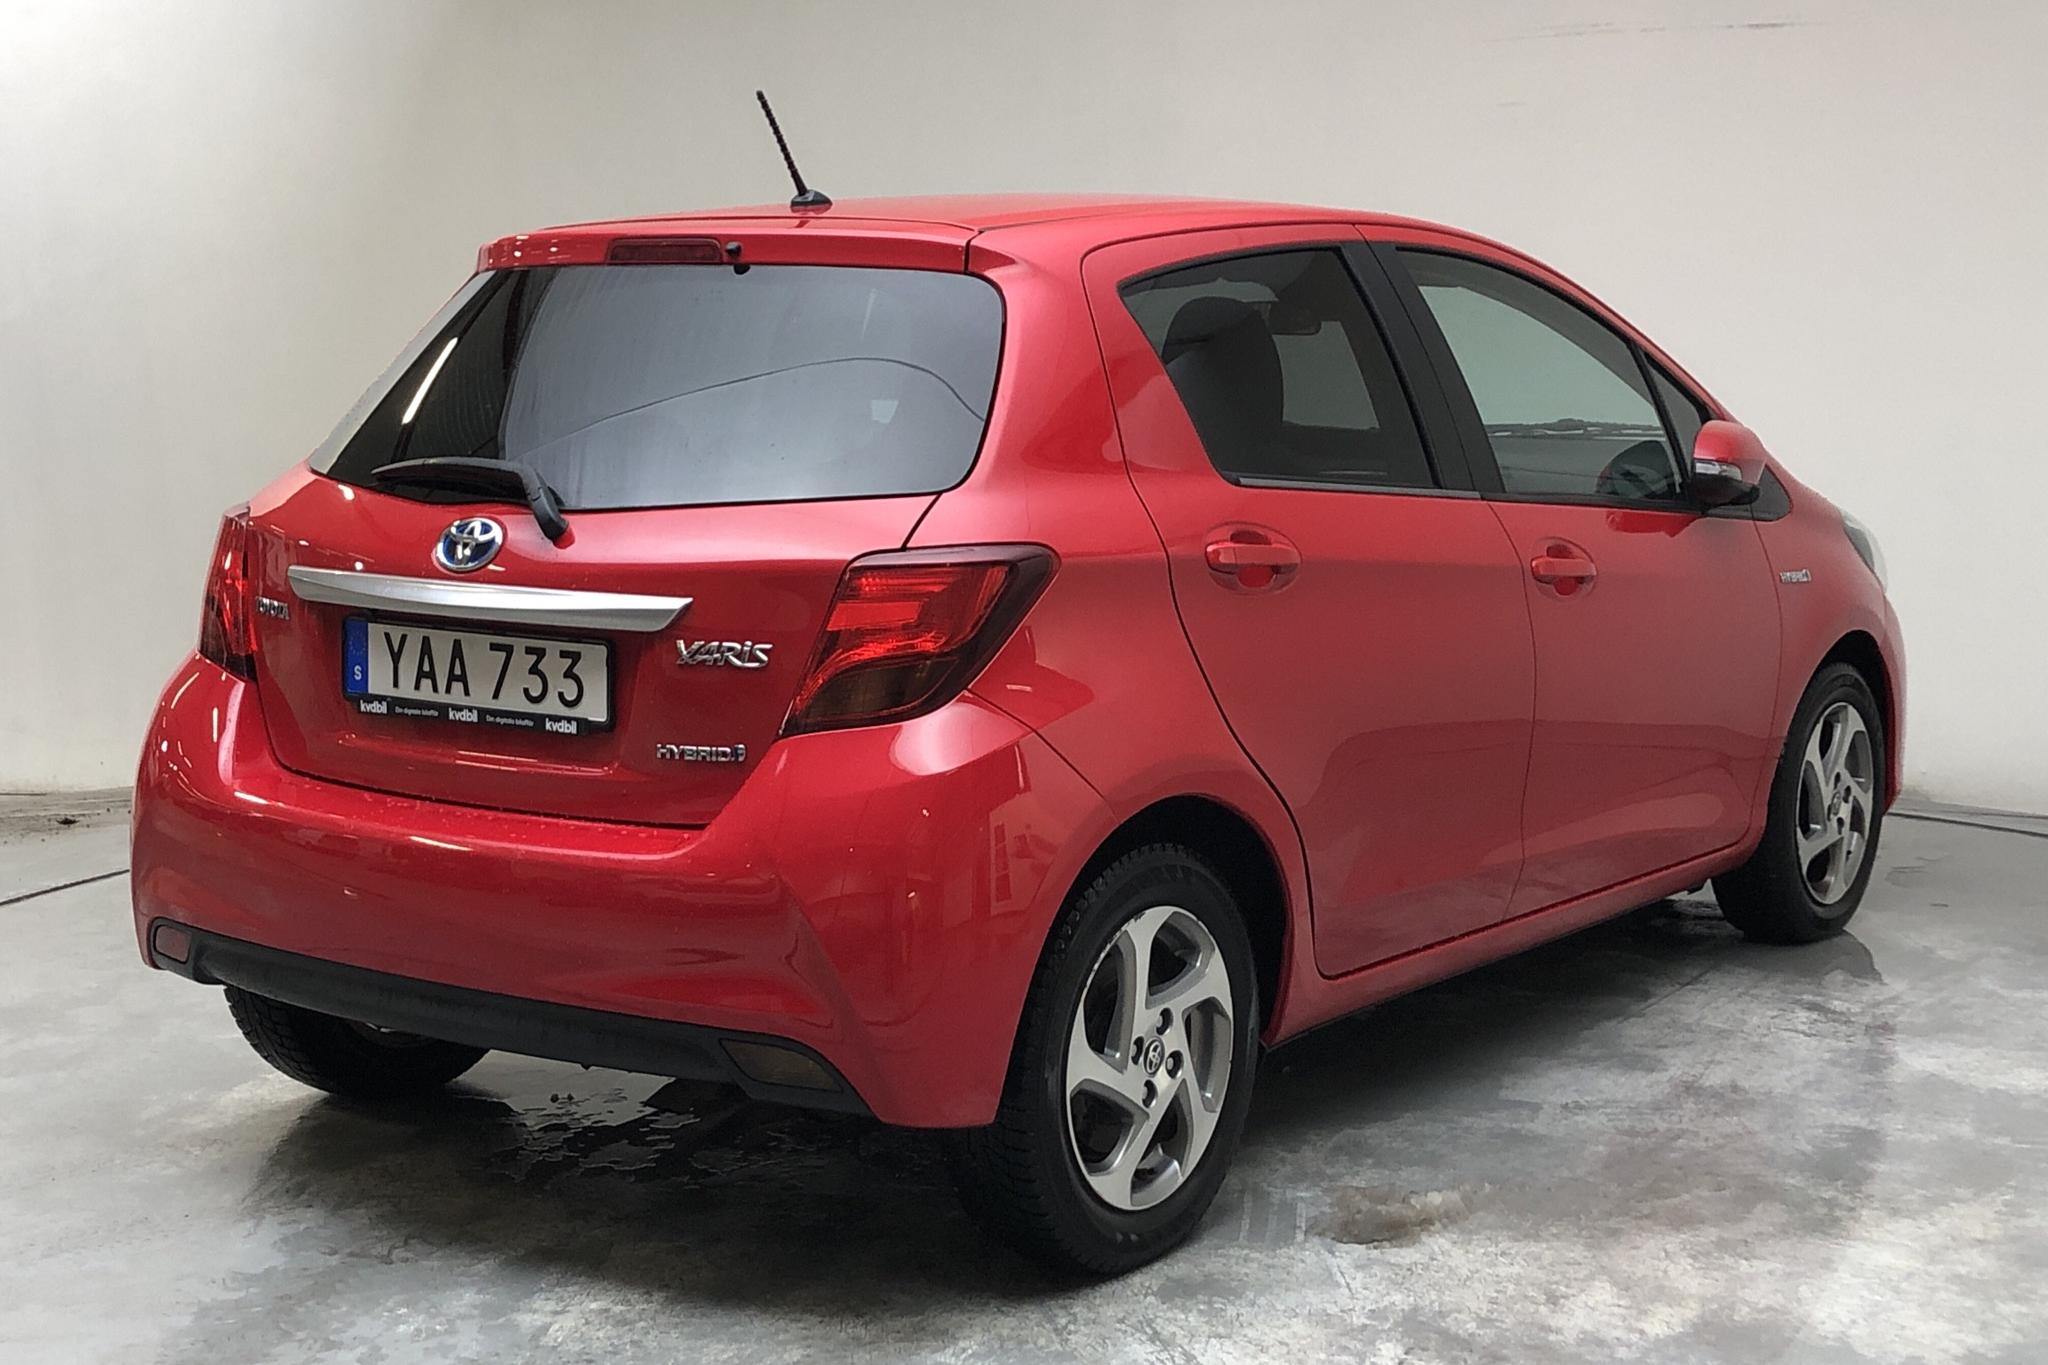 Toyota Yaris 1.5 HSD 5dr (75hk) - 98 850 km - Automatic - red - 2016